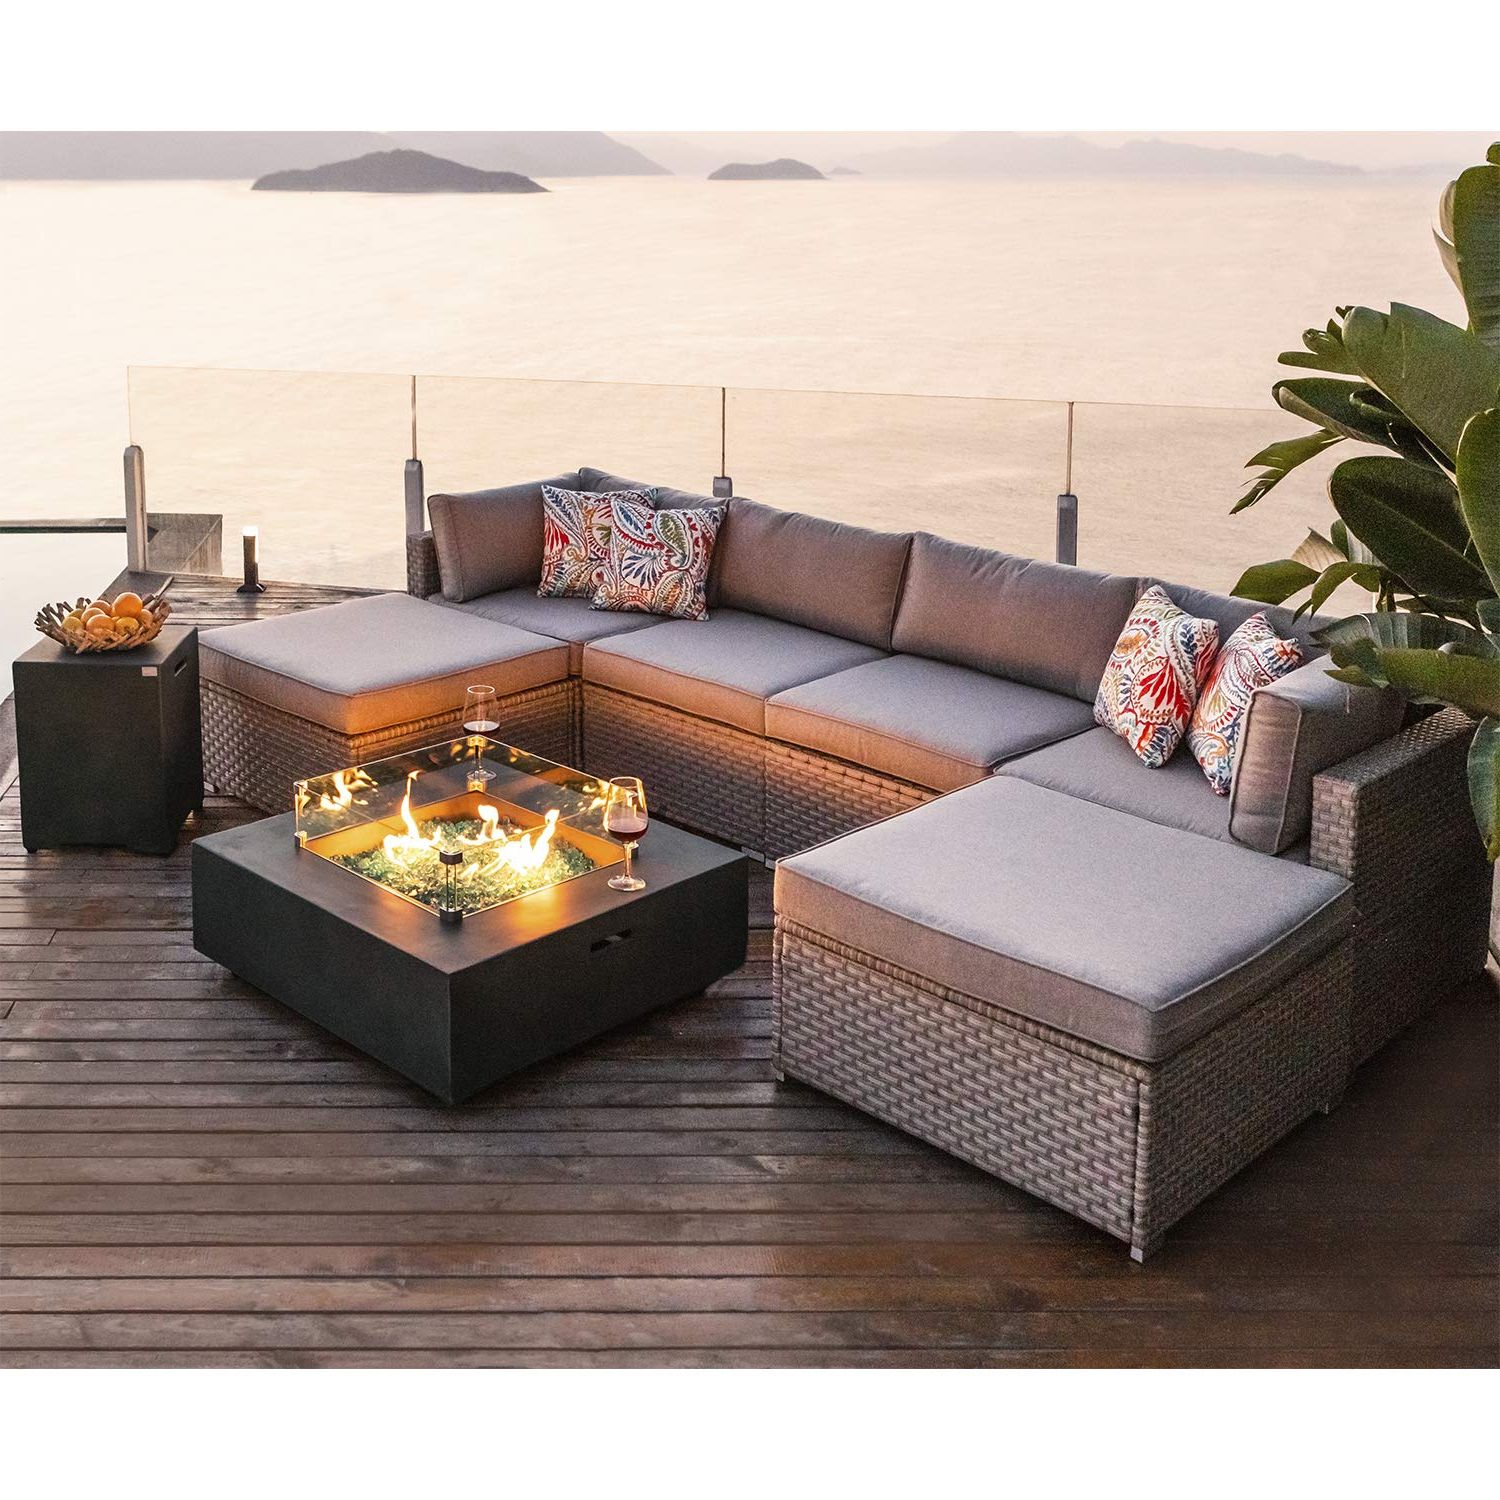 Fire Pit Table Wicker Sectional Sofa Set Within Latest Amazon: Cosiest 8 Piece Fire Pit Table Outdoor Furniture Sofa, Gray  Wicker Cushion Sectional W 35 Inch Square Celadon Fire Heater (50,000 Btu)  W Wind Guard And Tank Outside(20lb) For Garden,pool : Patio, Lawn (Photo 1 of 15)